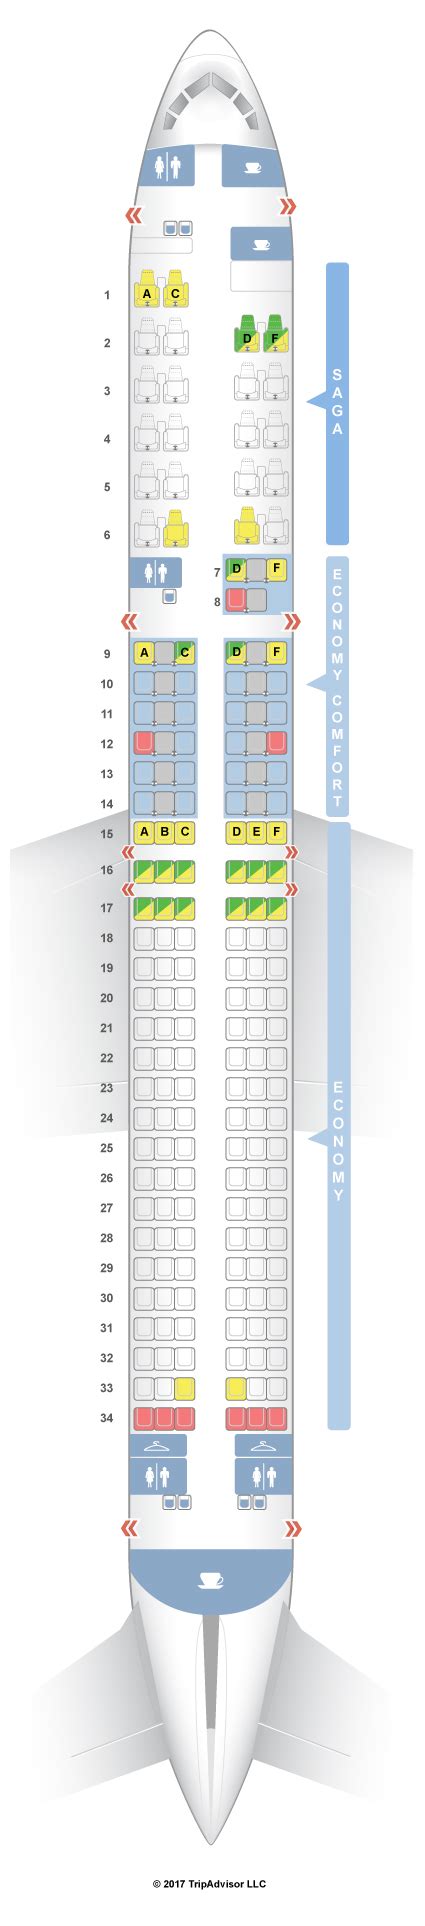 Icelandair boeing 757 200 seat map. Things To Know About Icelandair boeing 757 200 seat map. 